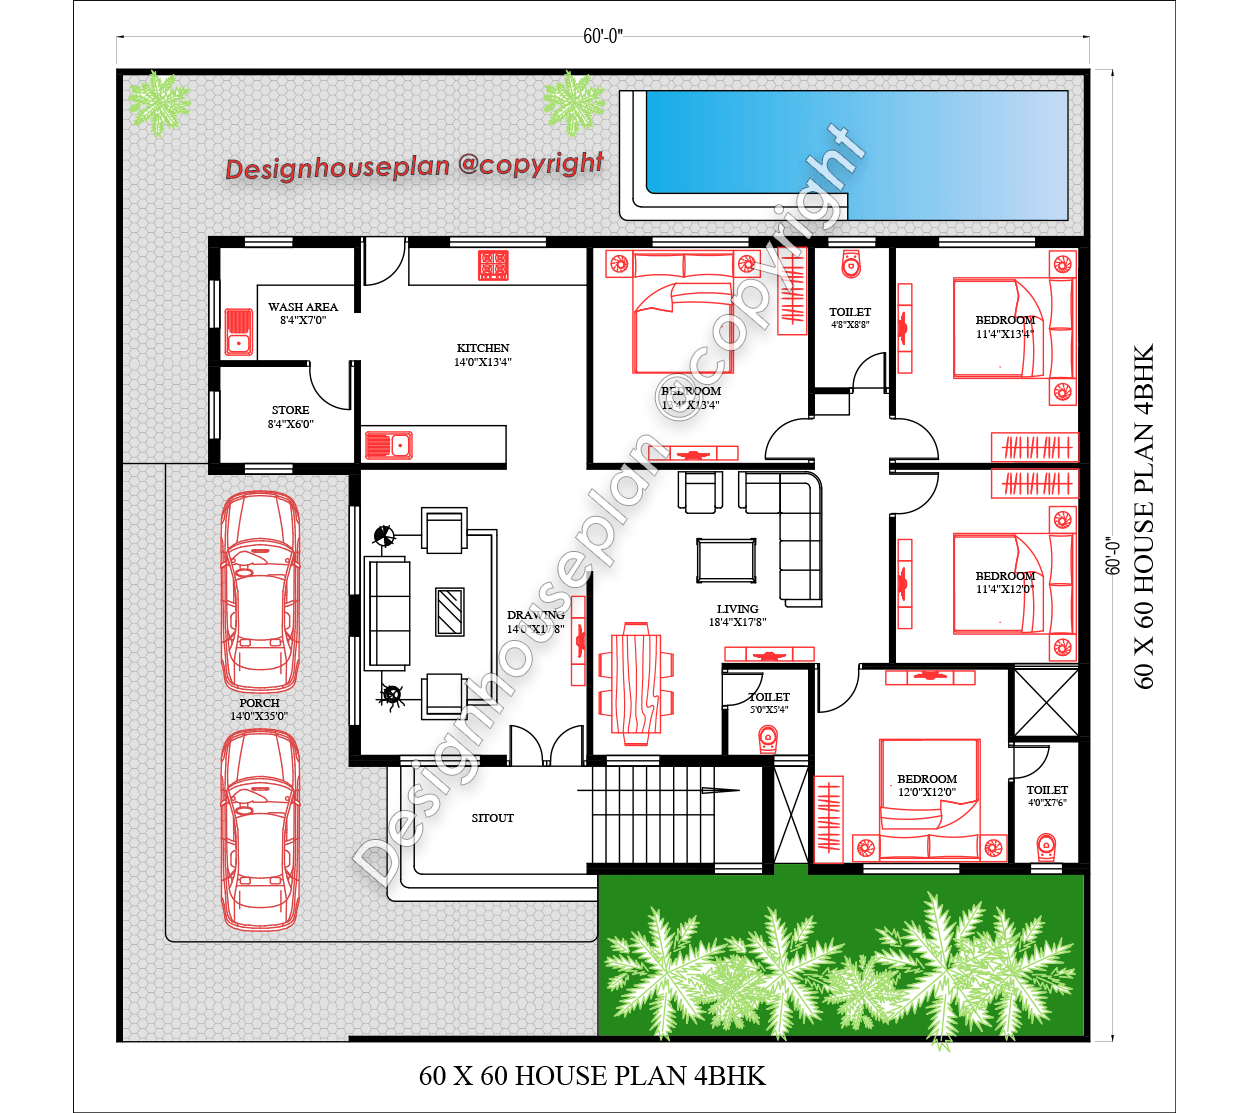 60x60 affordable house design